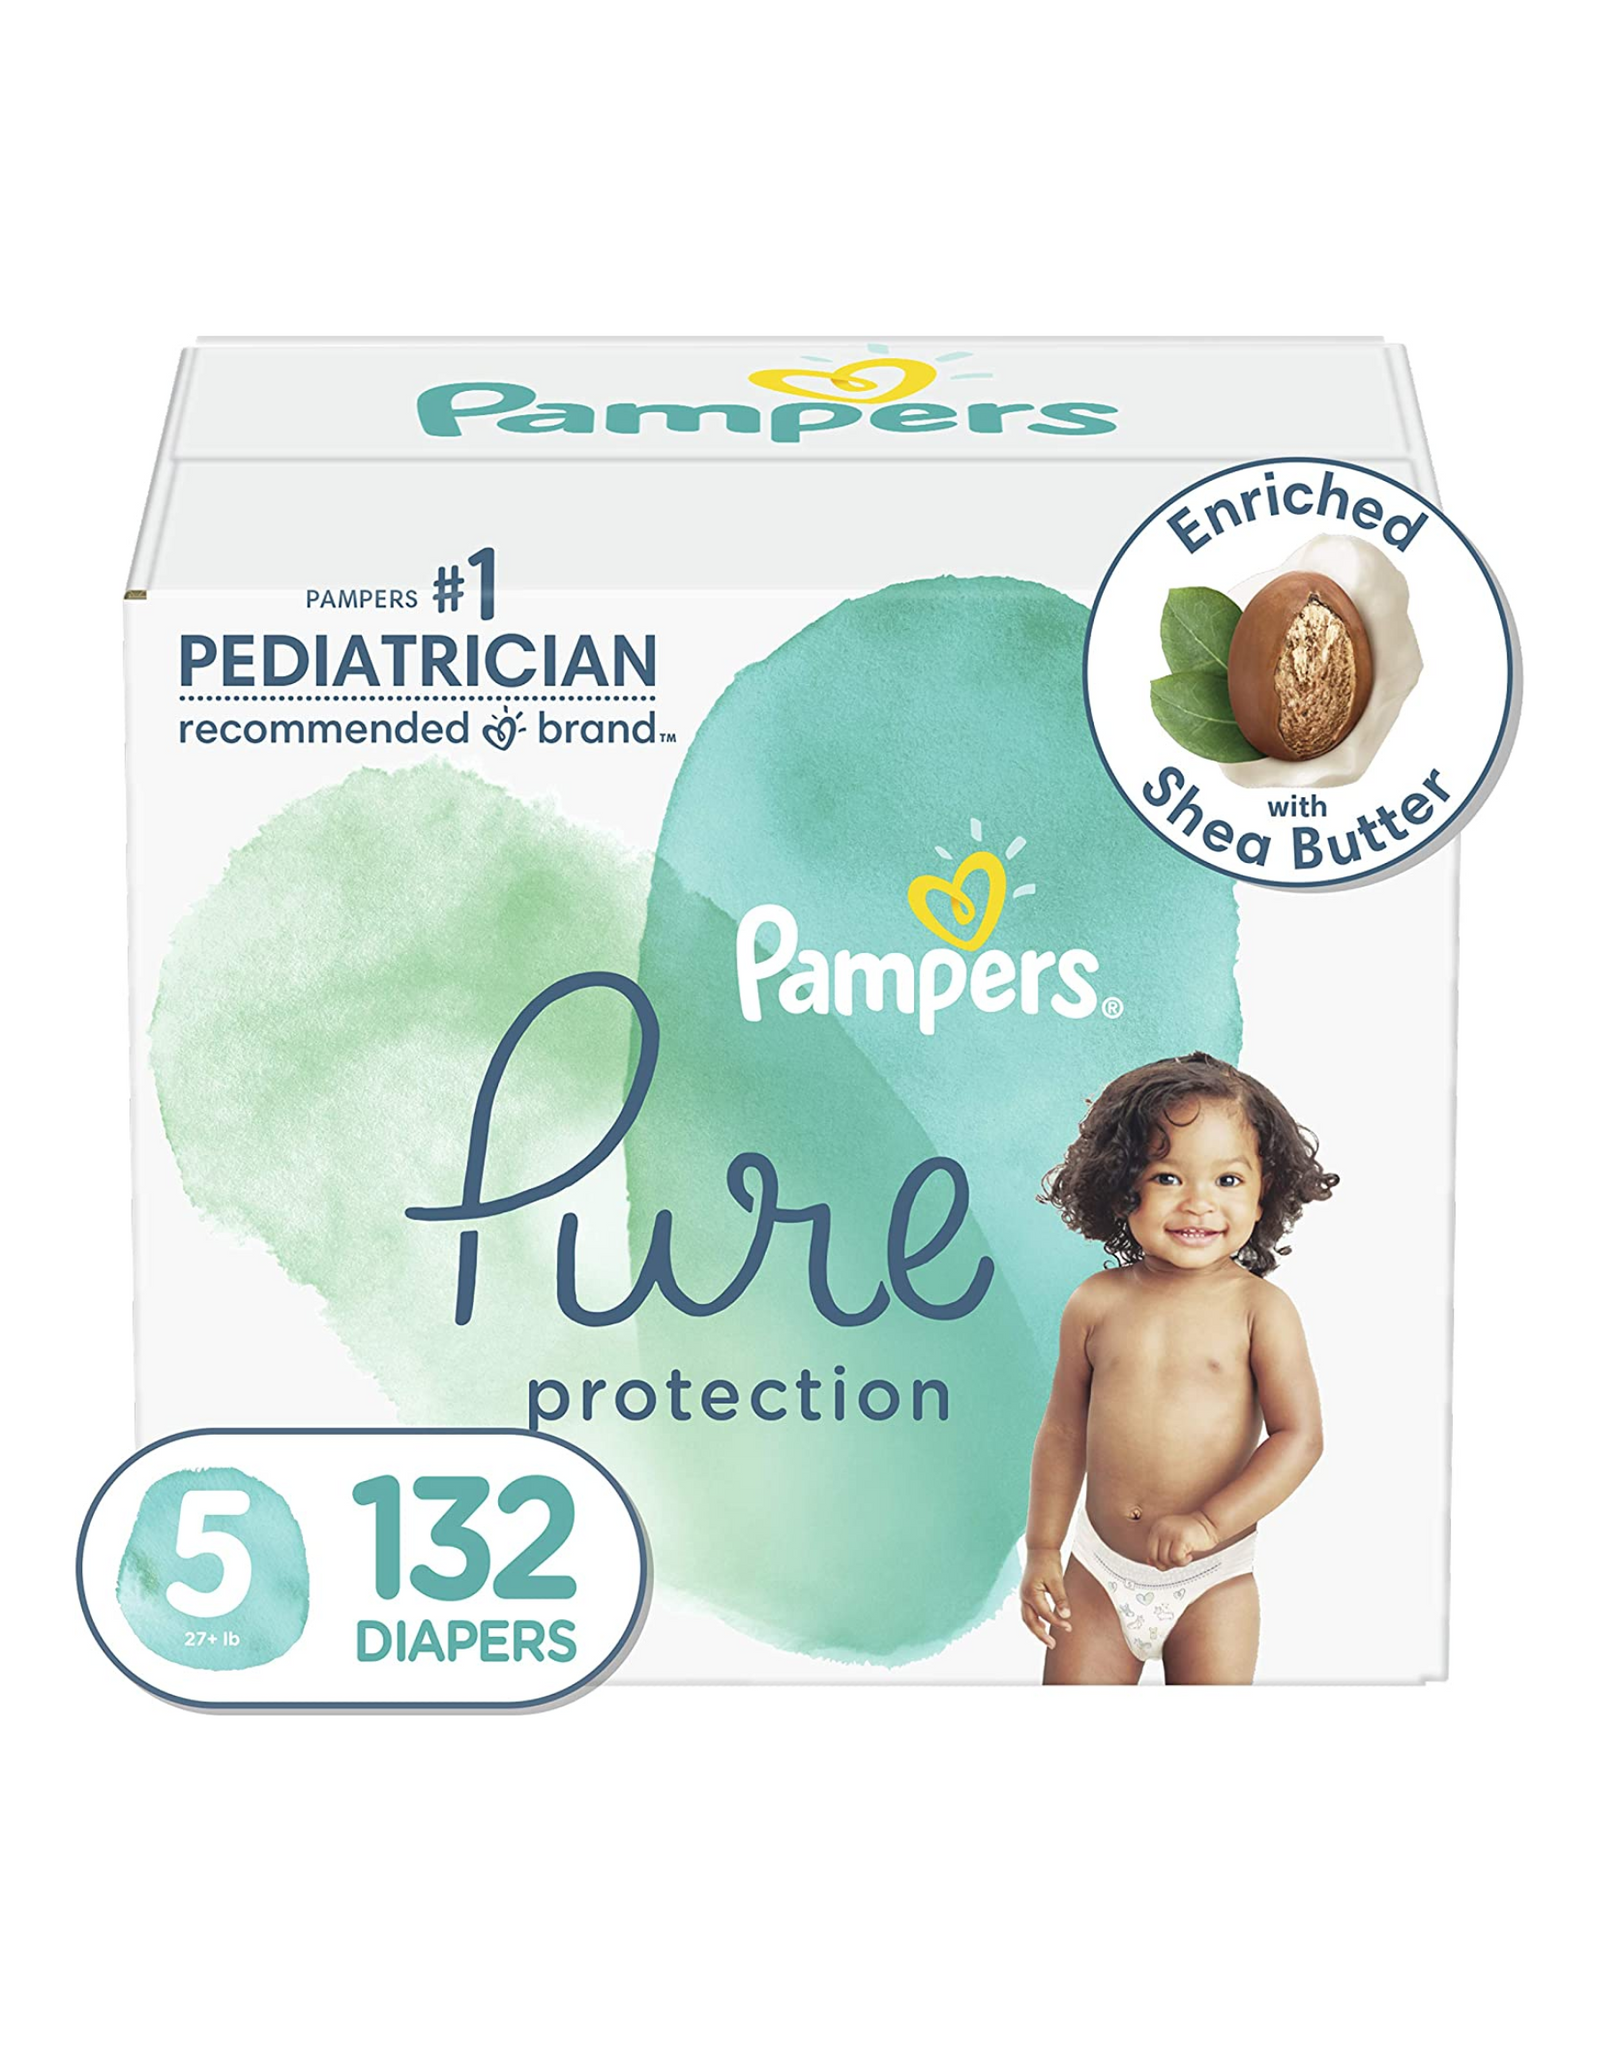 Diapers Size 5, 132 Count - Pampers Pure Protection Baby Diapers, Fragrance Free (Packaging May Vary)